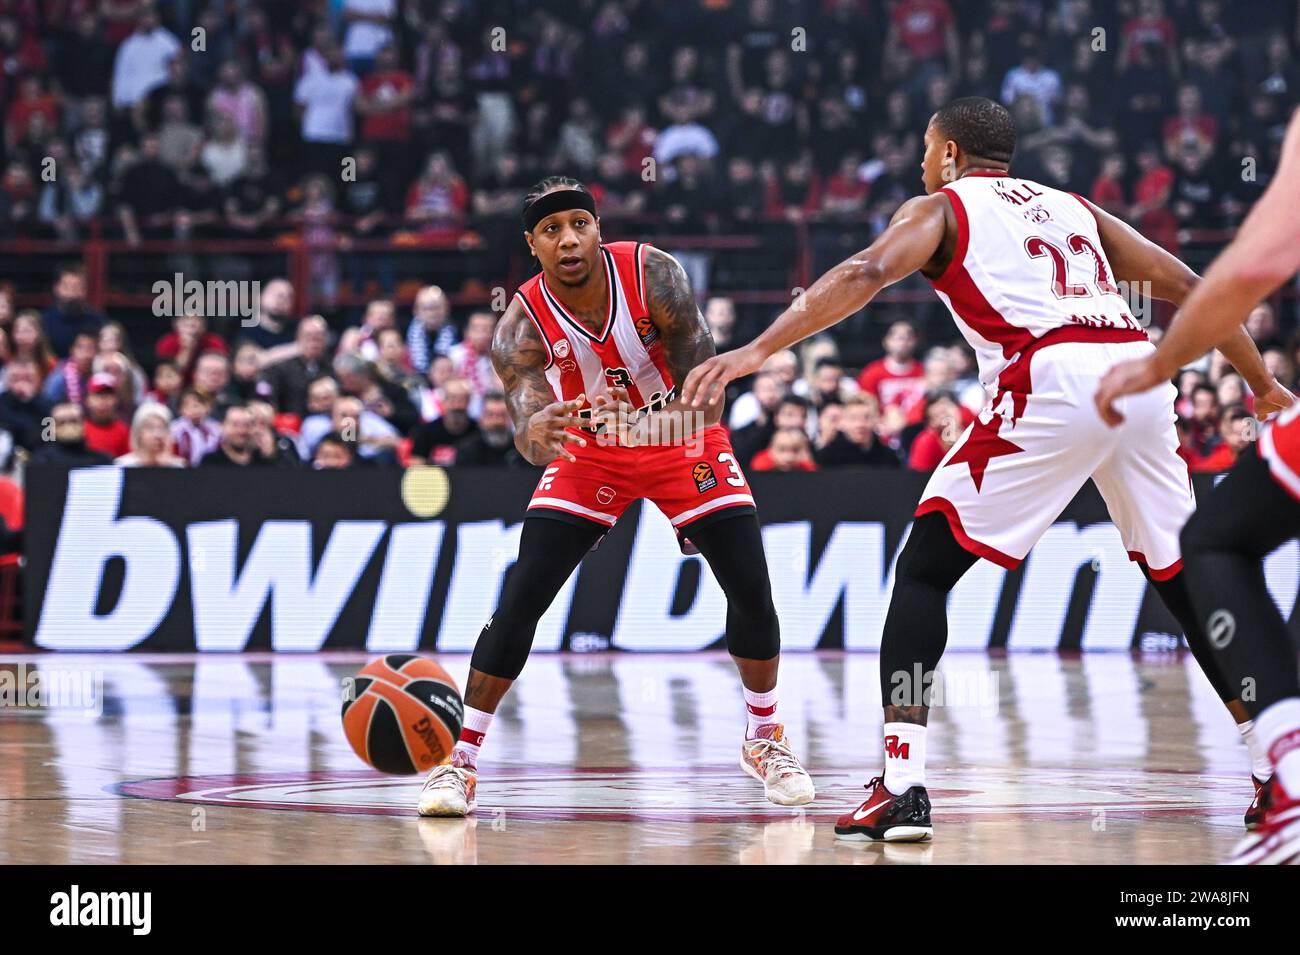 Piraeus Lombardy Greece 2nd Jan 2024 3 Isaiah Canaan Of Olympiacos Piraeus During The Euroleague Round 18 Match Between Olympiacos Piraeus And Ea7 Emporio Armani Milan At Peace Friendship Stadium On January 2 2024 In Piraeus Greece Credit Image Stefanos Kyriaziszuma Press Wire Editorial Usage Only! Not For Commercial Usage! 2WA8JFN 